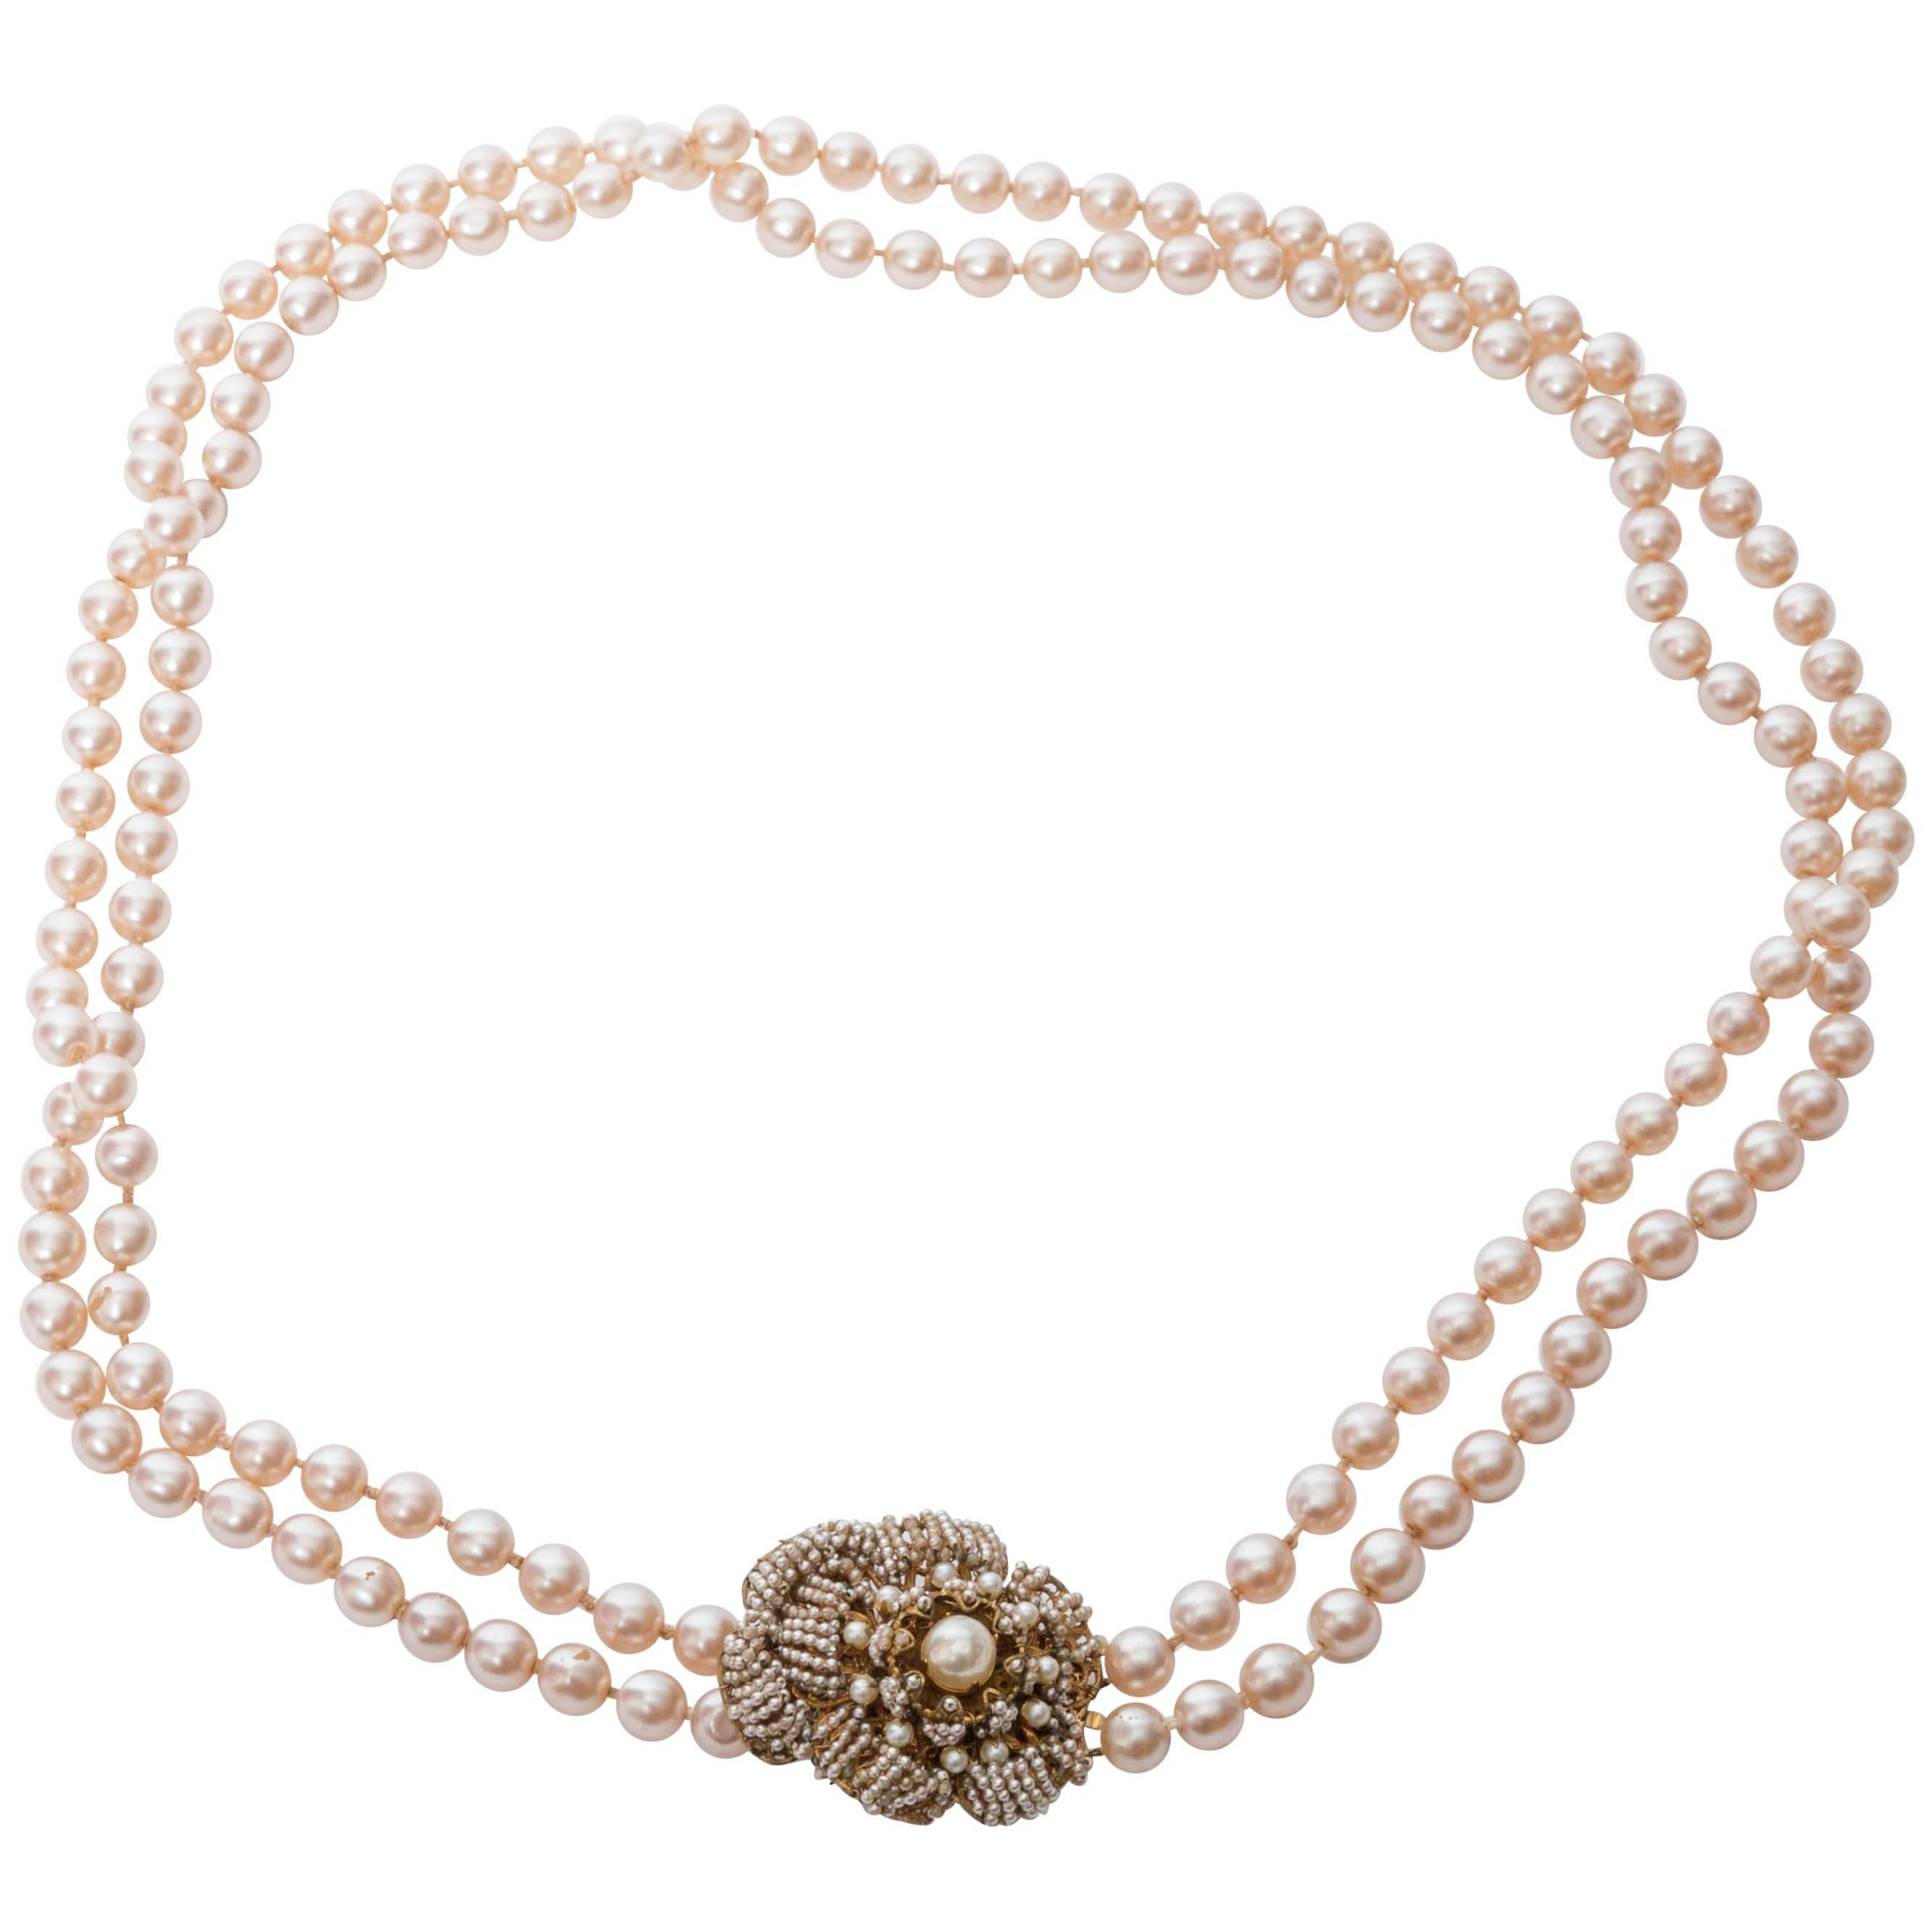 Miriam Haskell Vintage Pearl Rope Necklace with Seed Pearl Clasp 